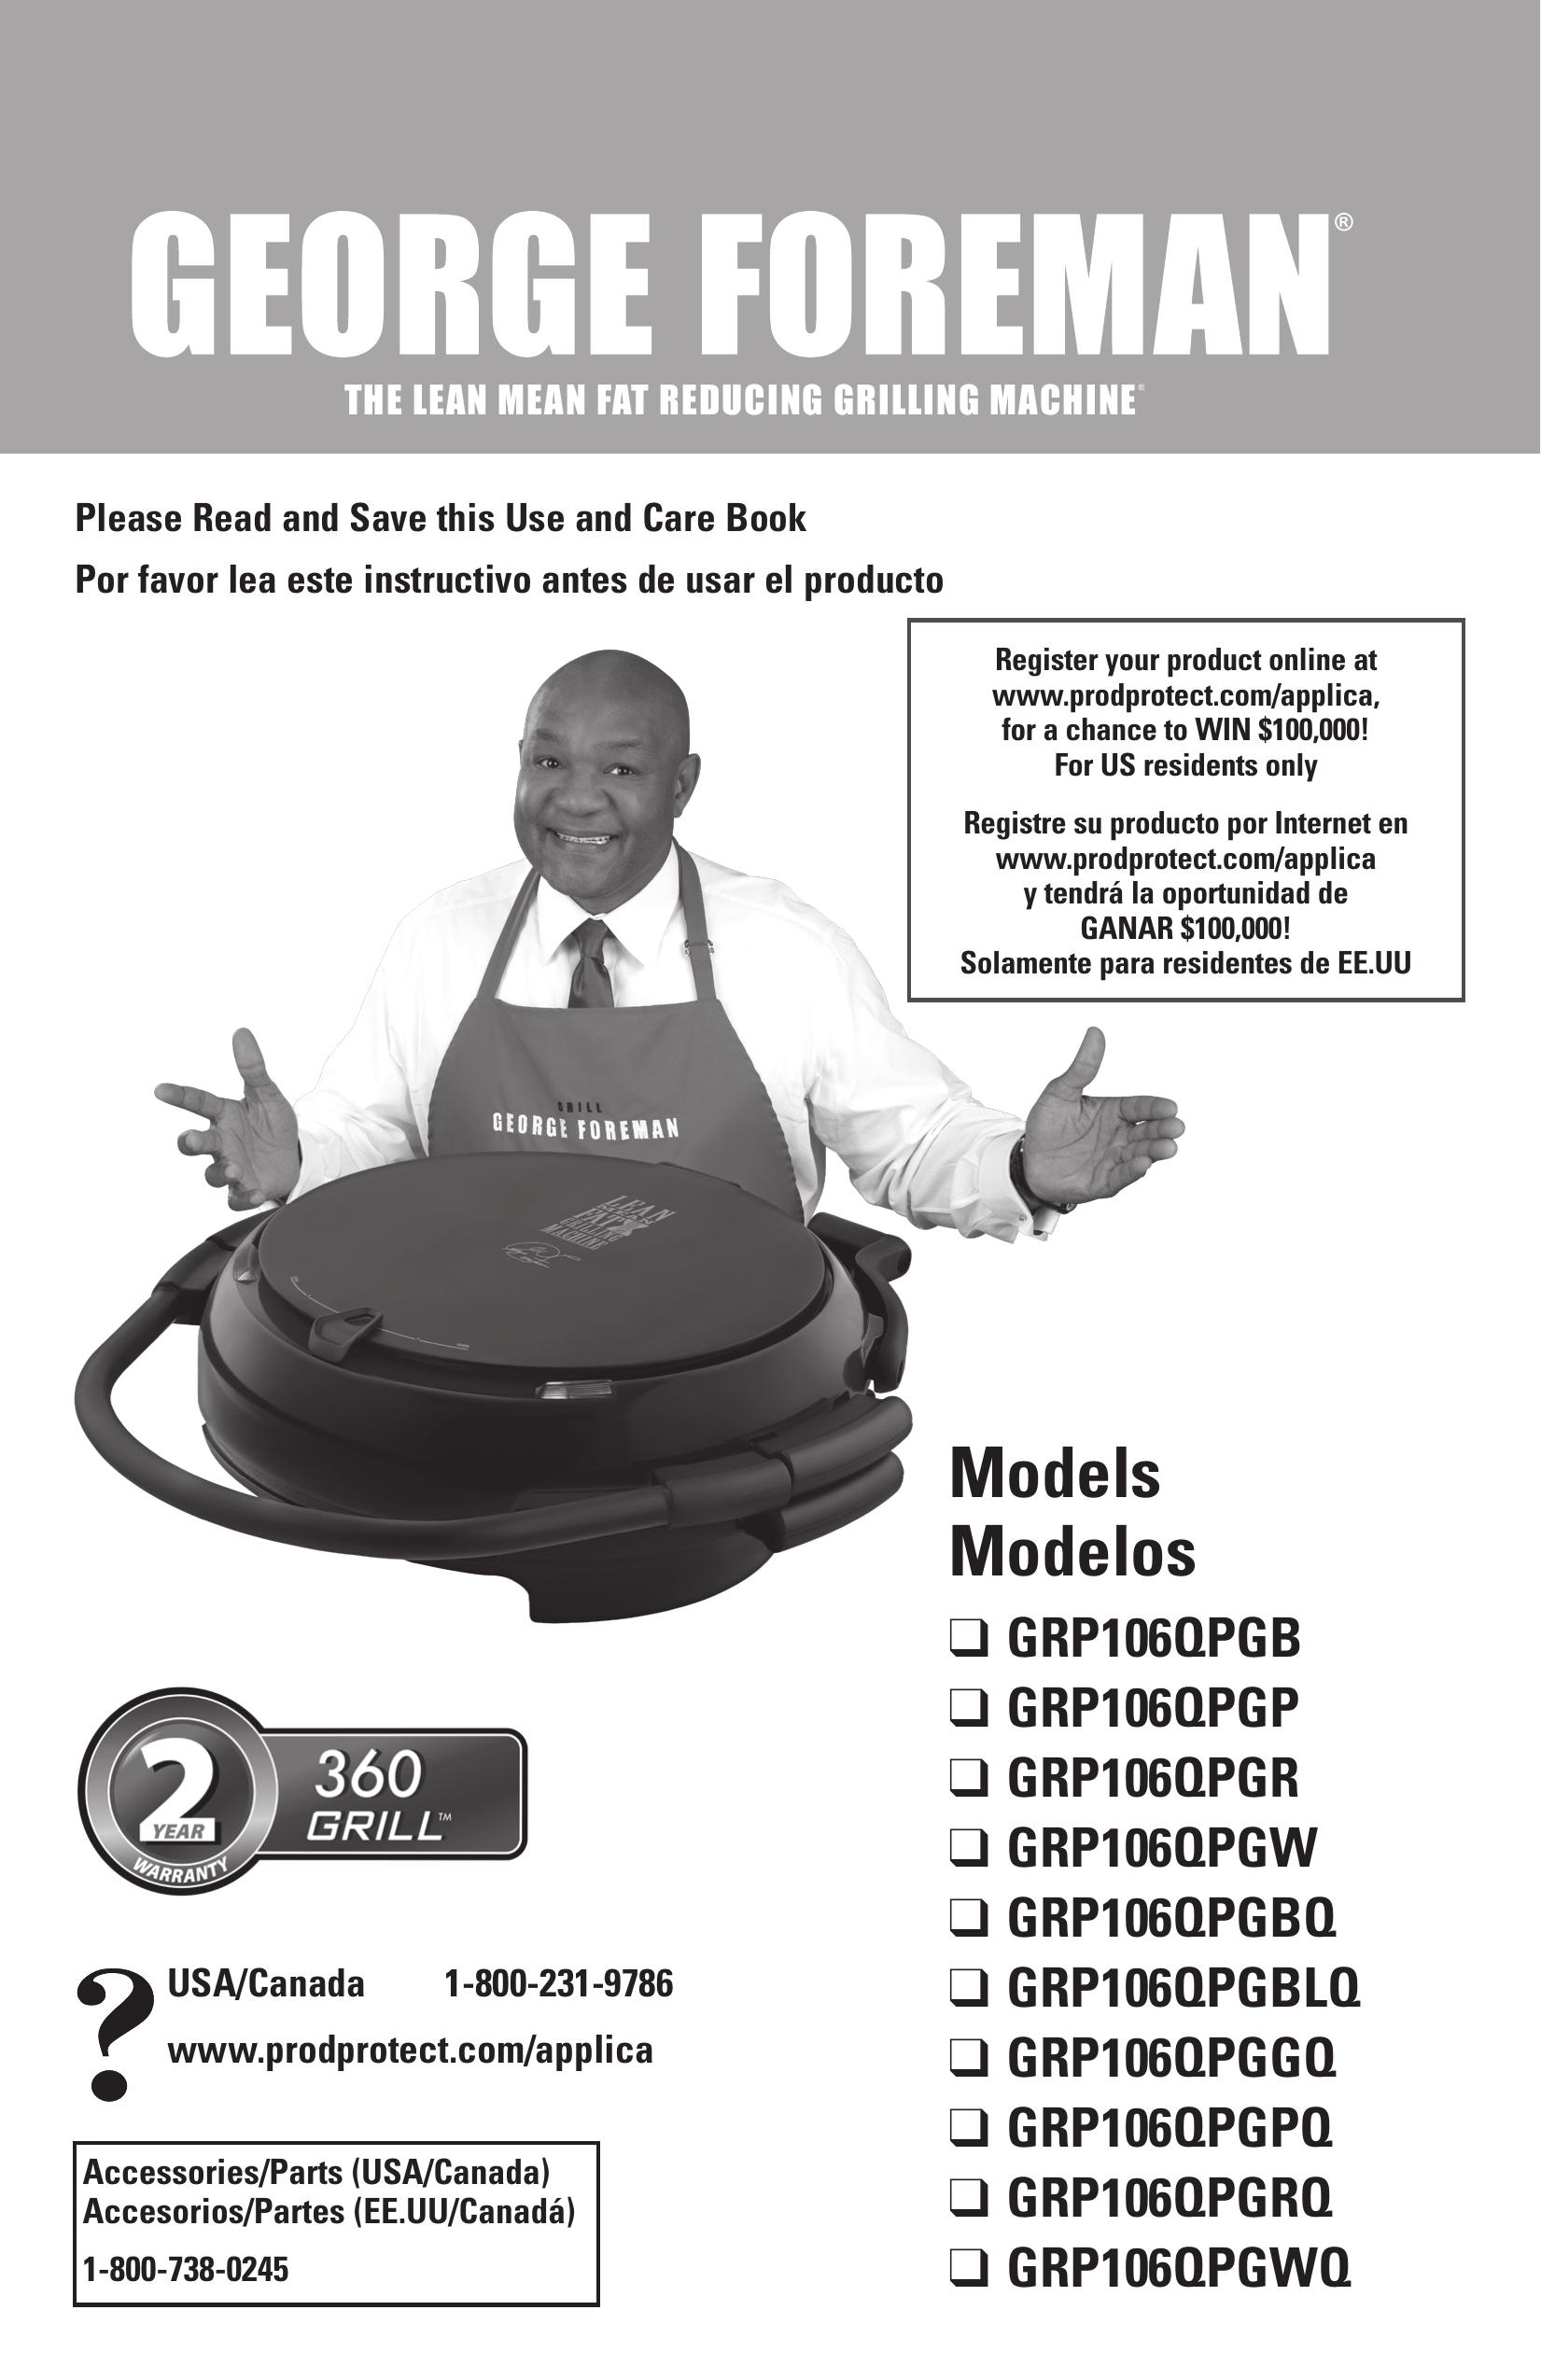 George Foreman GRP106QPGWQ Electric Grill User Manual